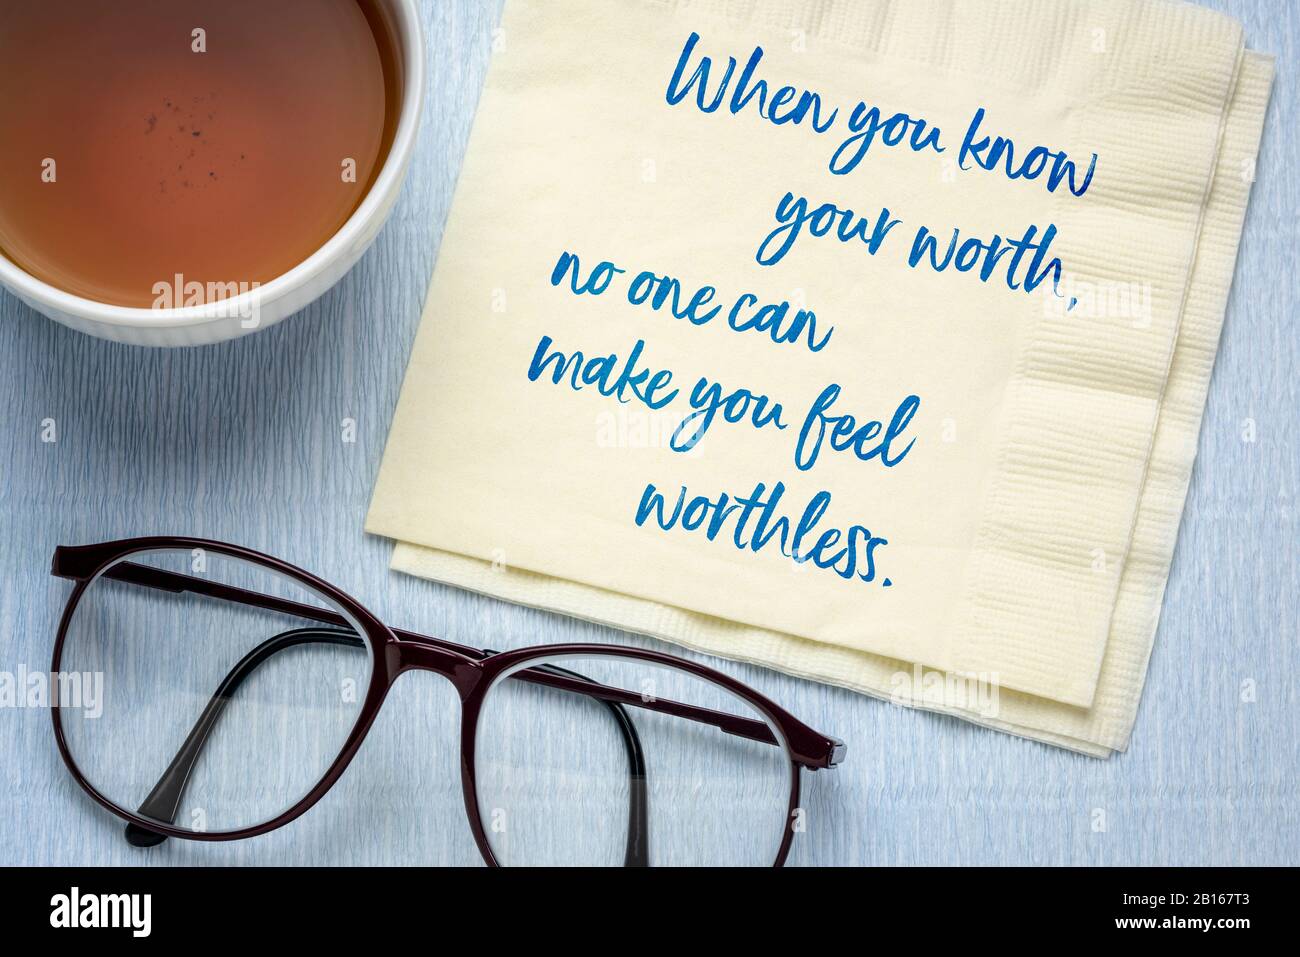 When you know you worth, no one can make you feel worthless - inspirational advice, handwriting on a napkin with a cup of tea, personal development an Stock Photo